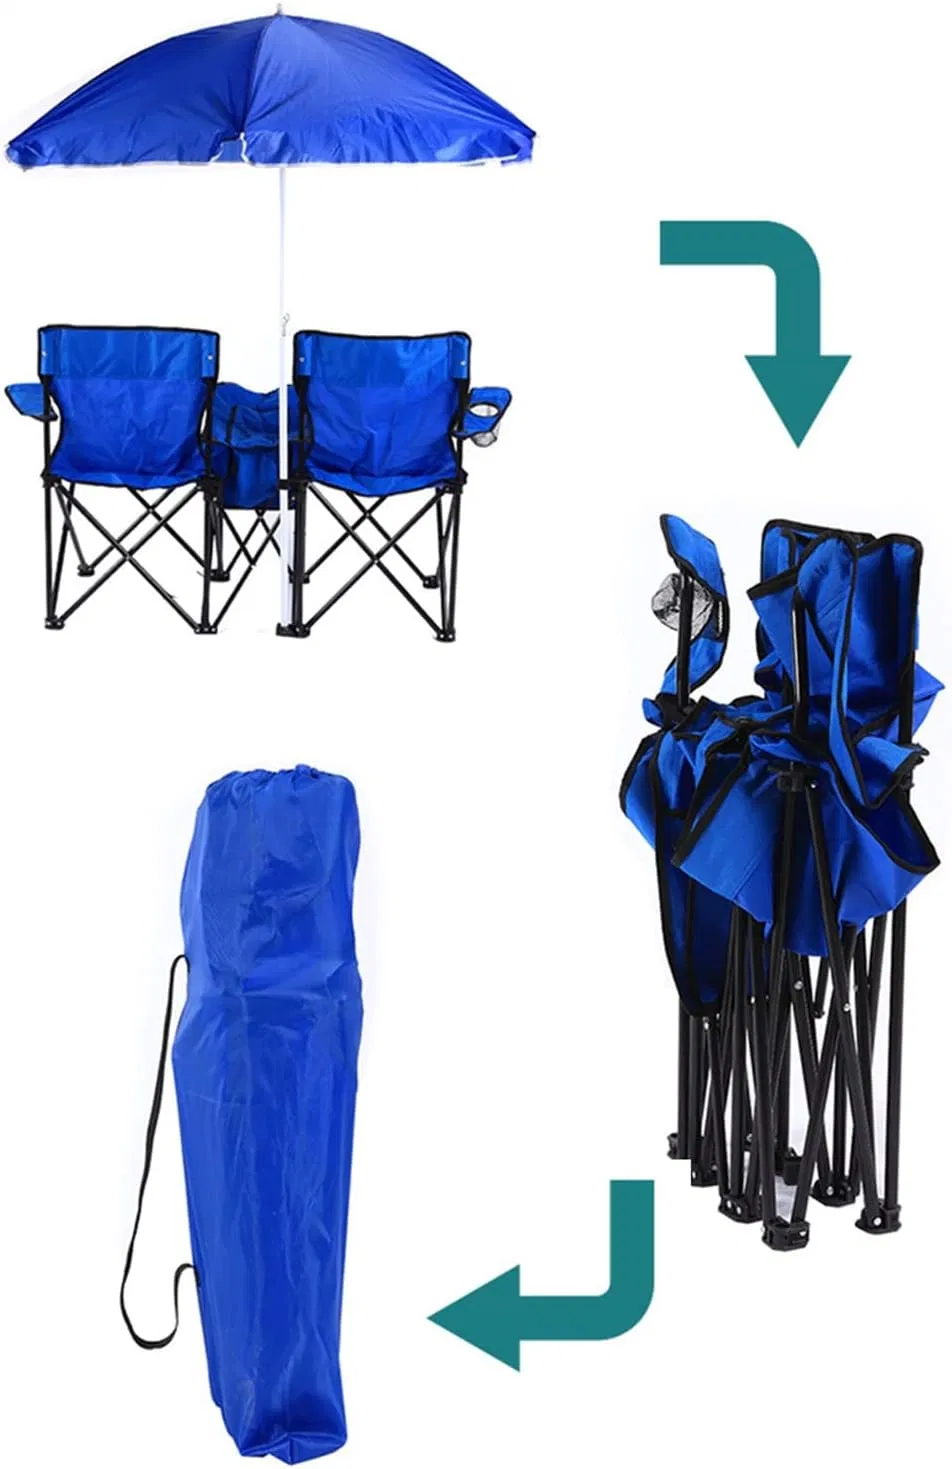 Portable Foldable Double Camping Beach Chair with Umbrella and Table Cooler Bag